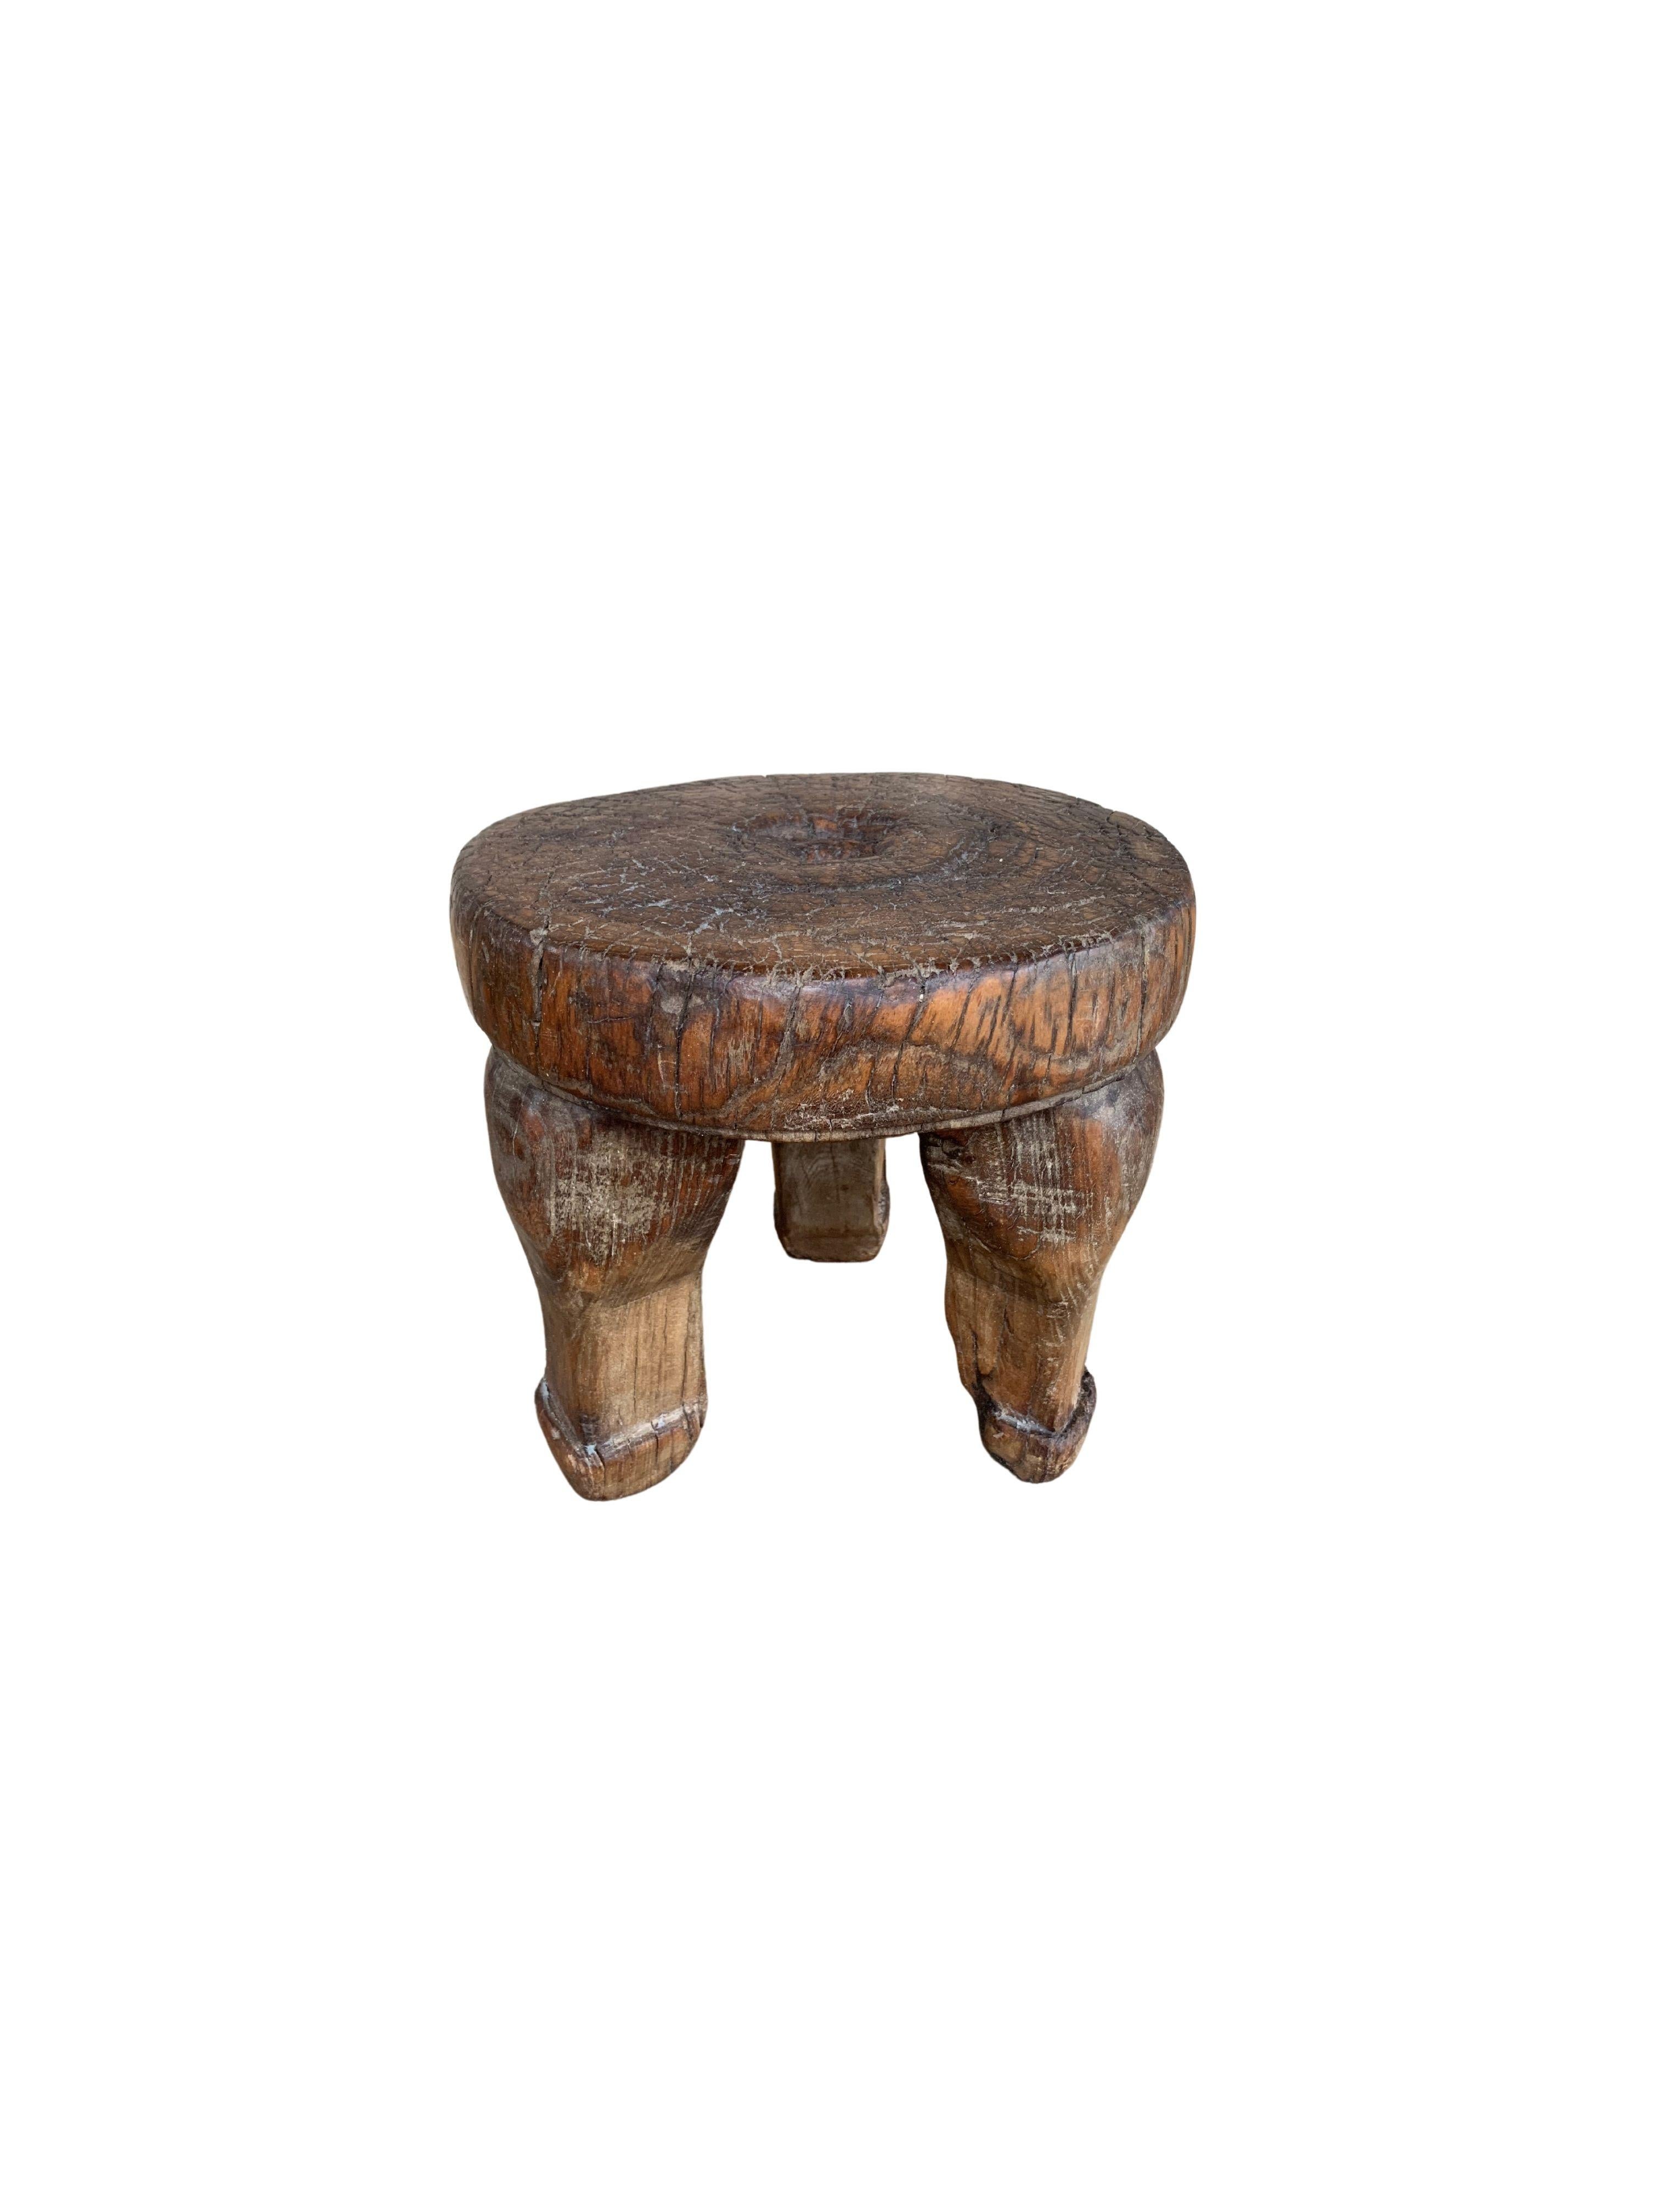 This Antique mini stool from the early 20th century features a beautiful age related patina and still retains some of its original lacquered finish. Crafted entirely from wooden joints, It remains sturdy and robust, a fantastic piece to use as a